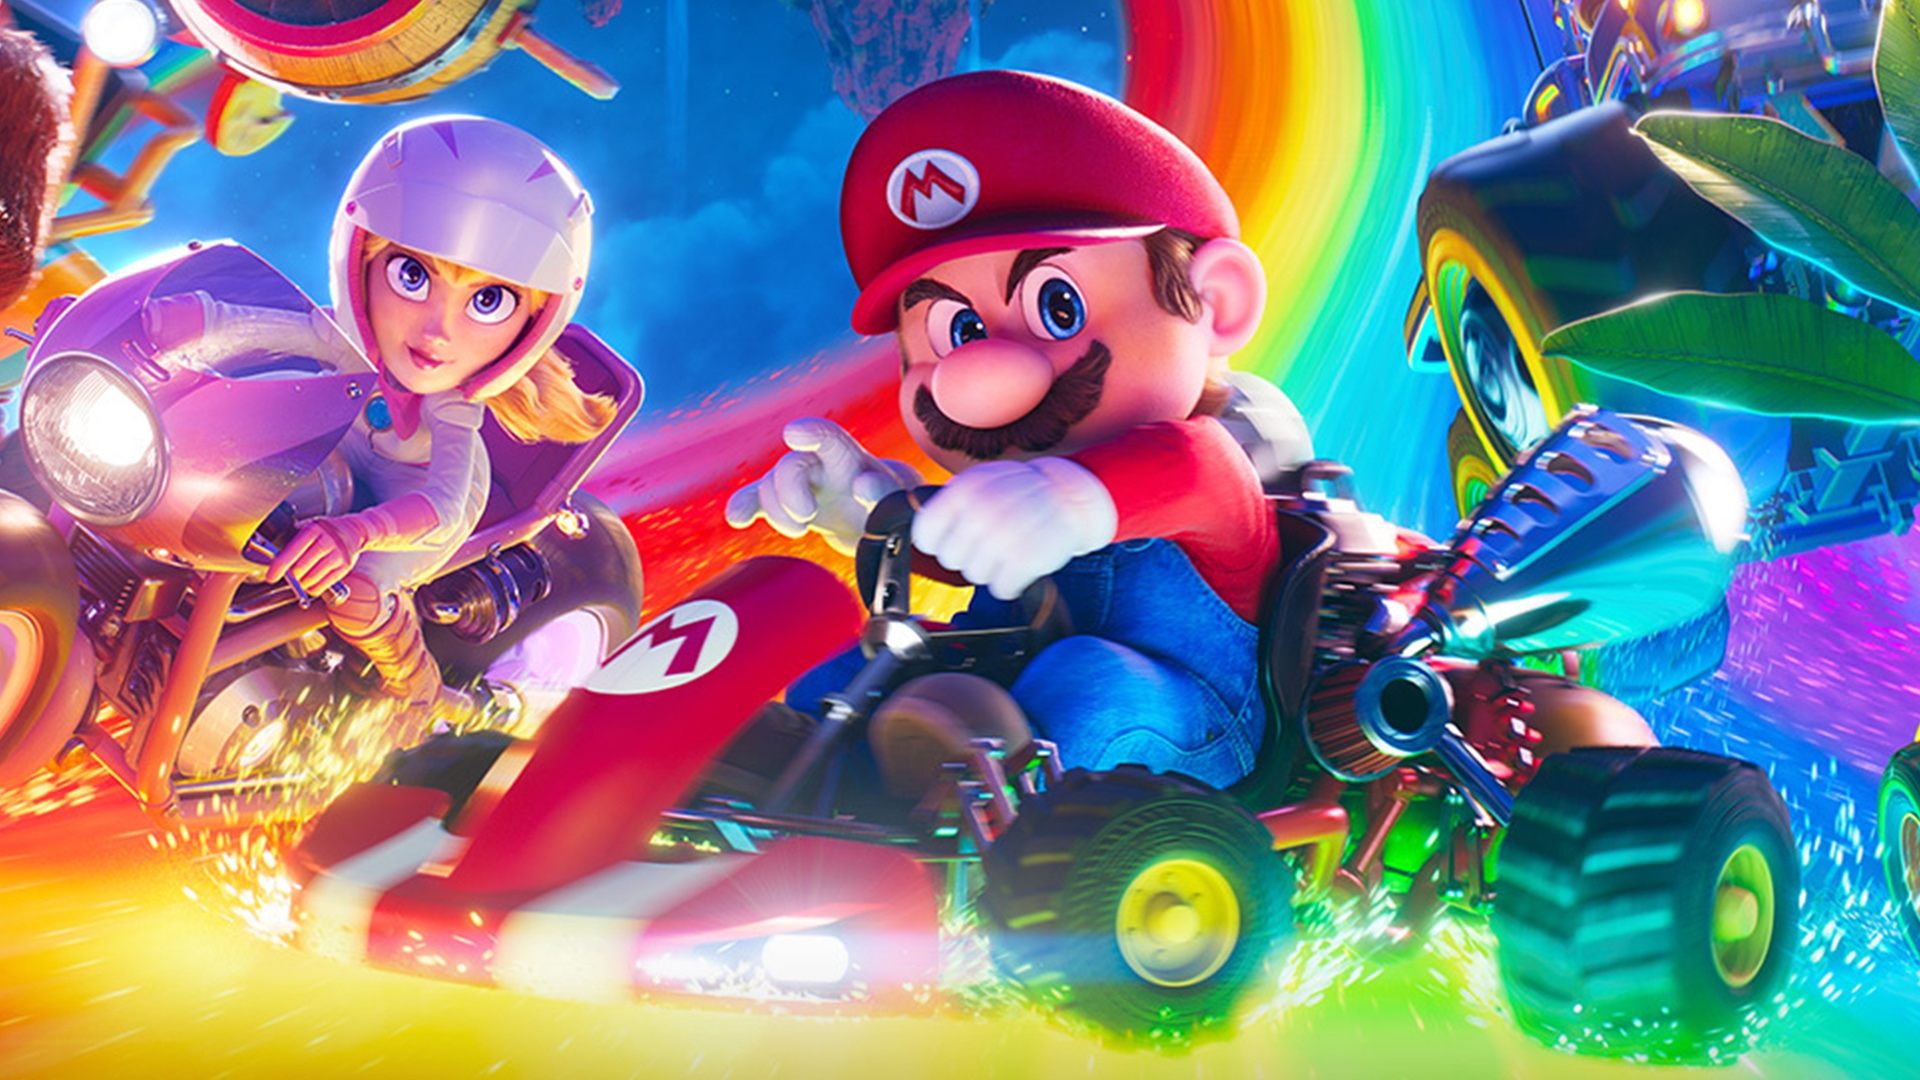 Nintendo is Off to the Races with The Super Mario Bros. Movie